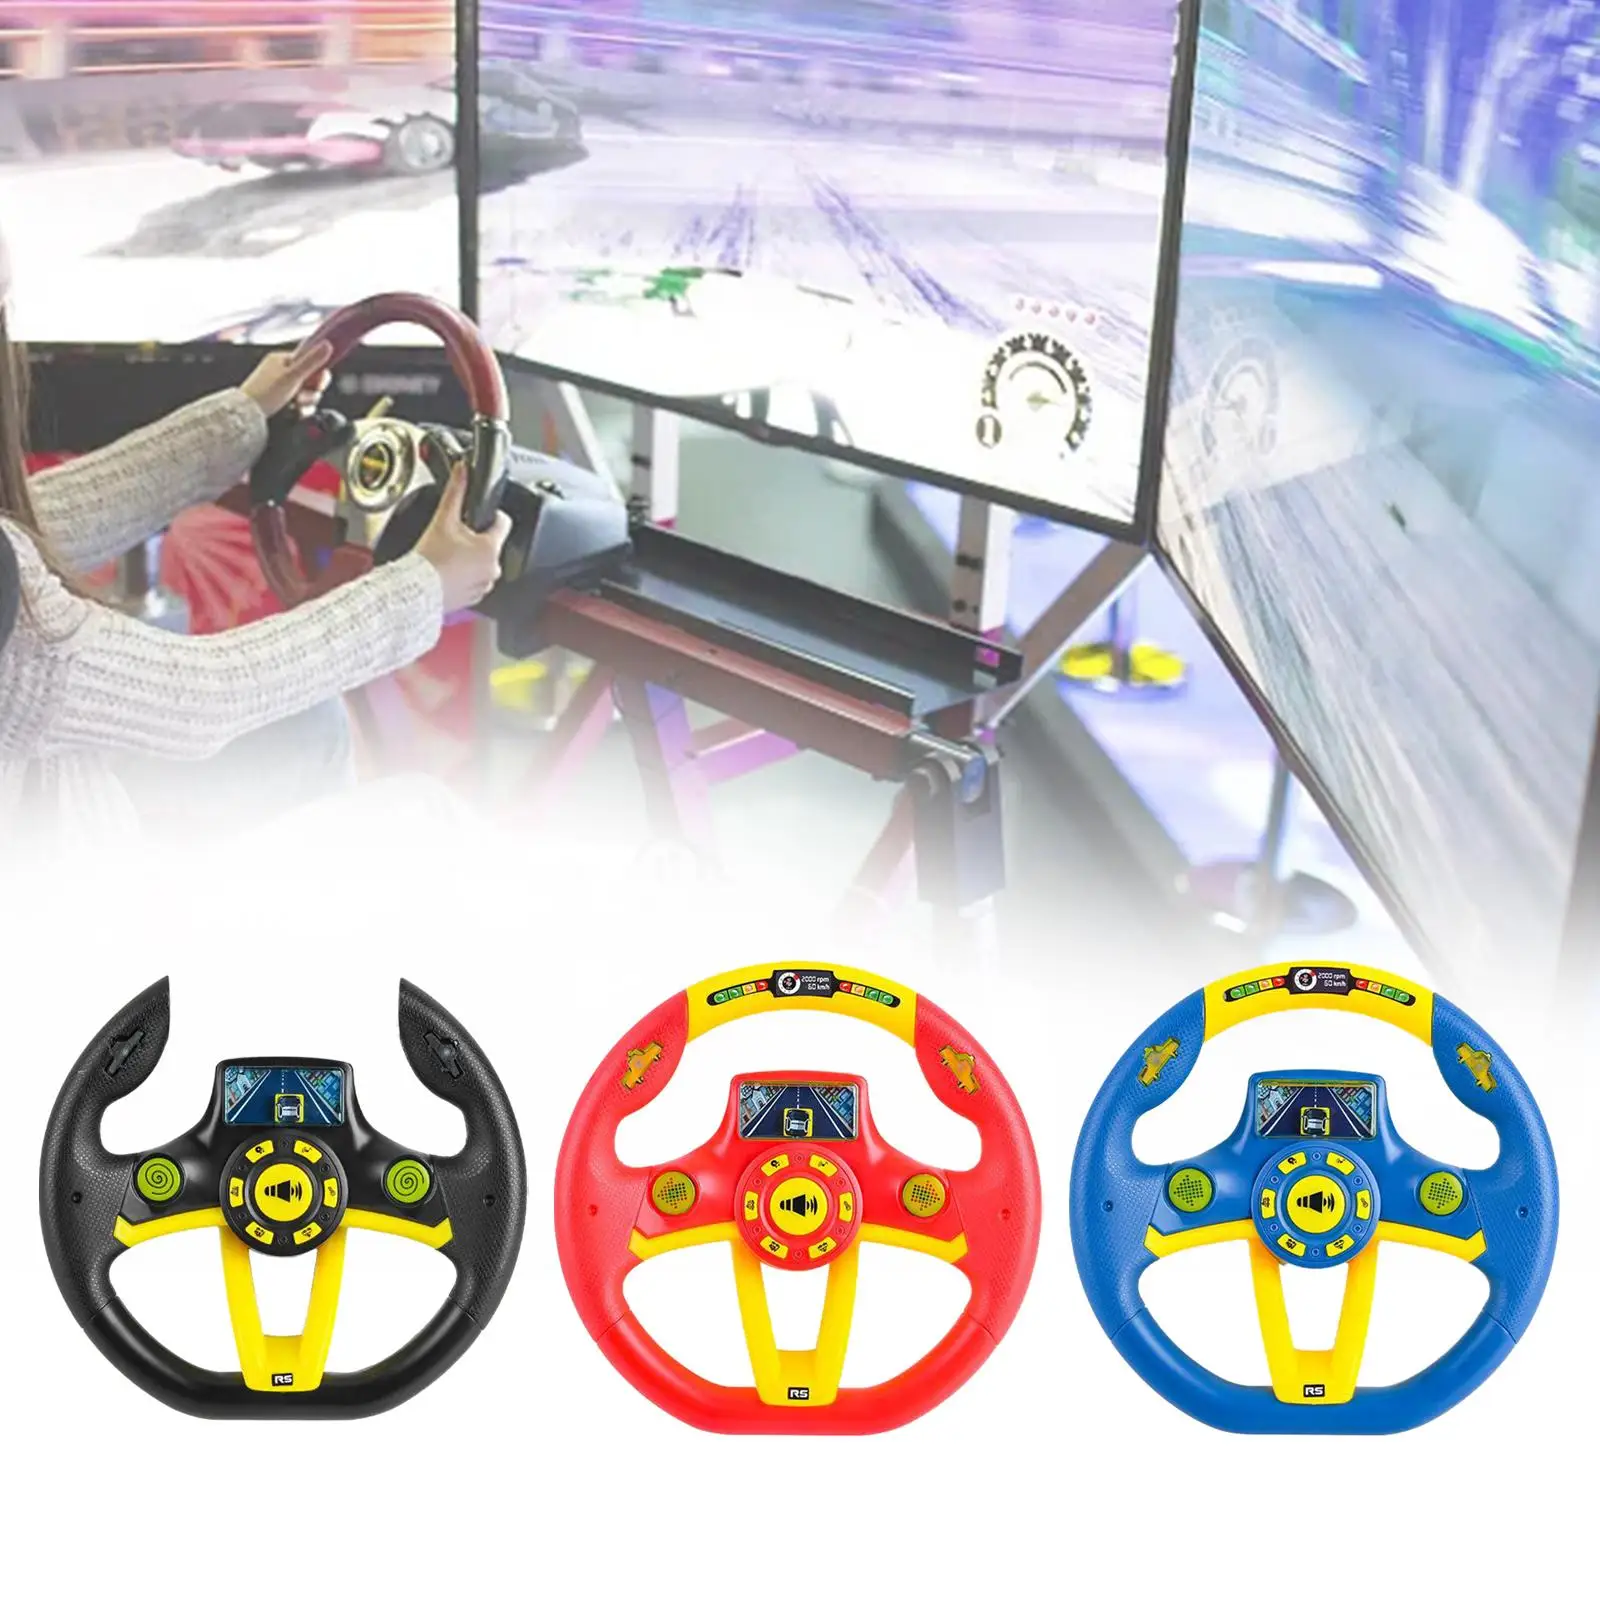 Simulation Steering Wheel Toy Driving Busy Board DIY Accessory for Climbing Frame Amusement Park Backyard Outdoor Birthday Gifts